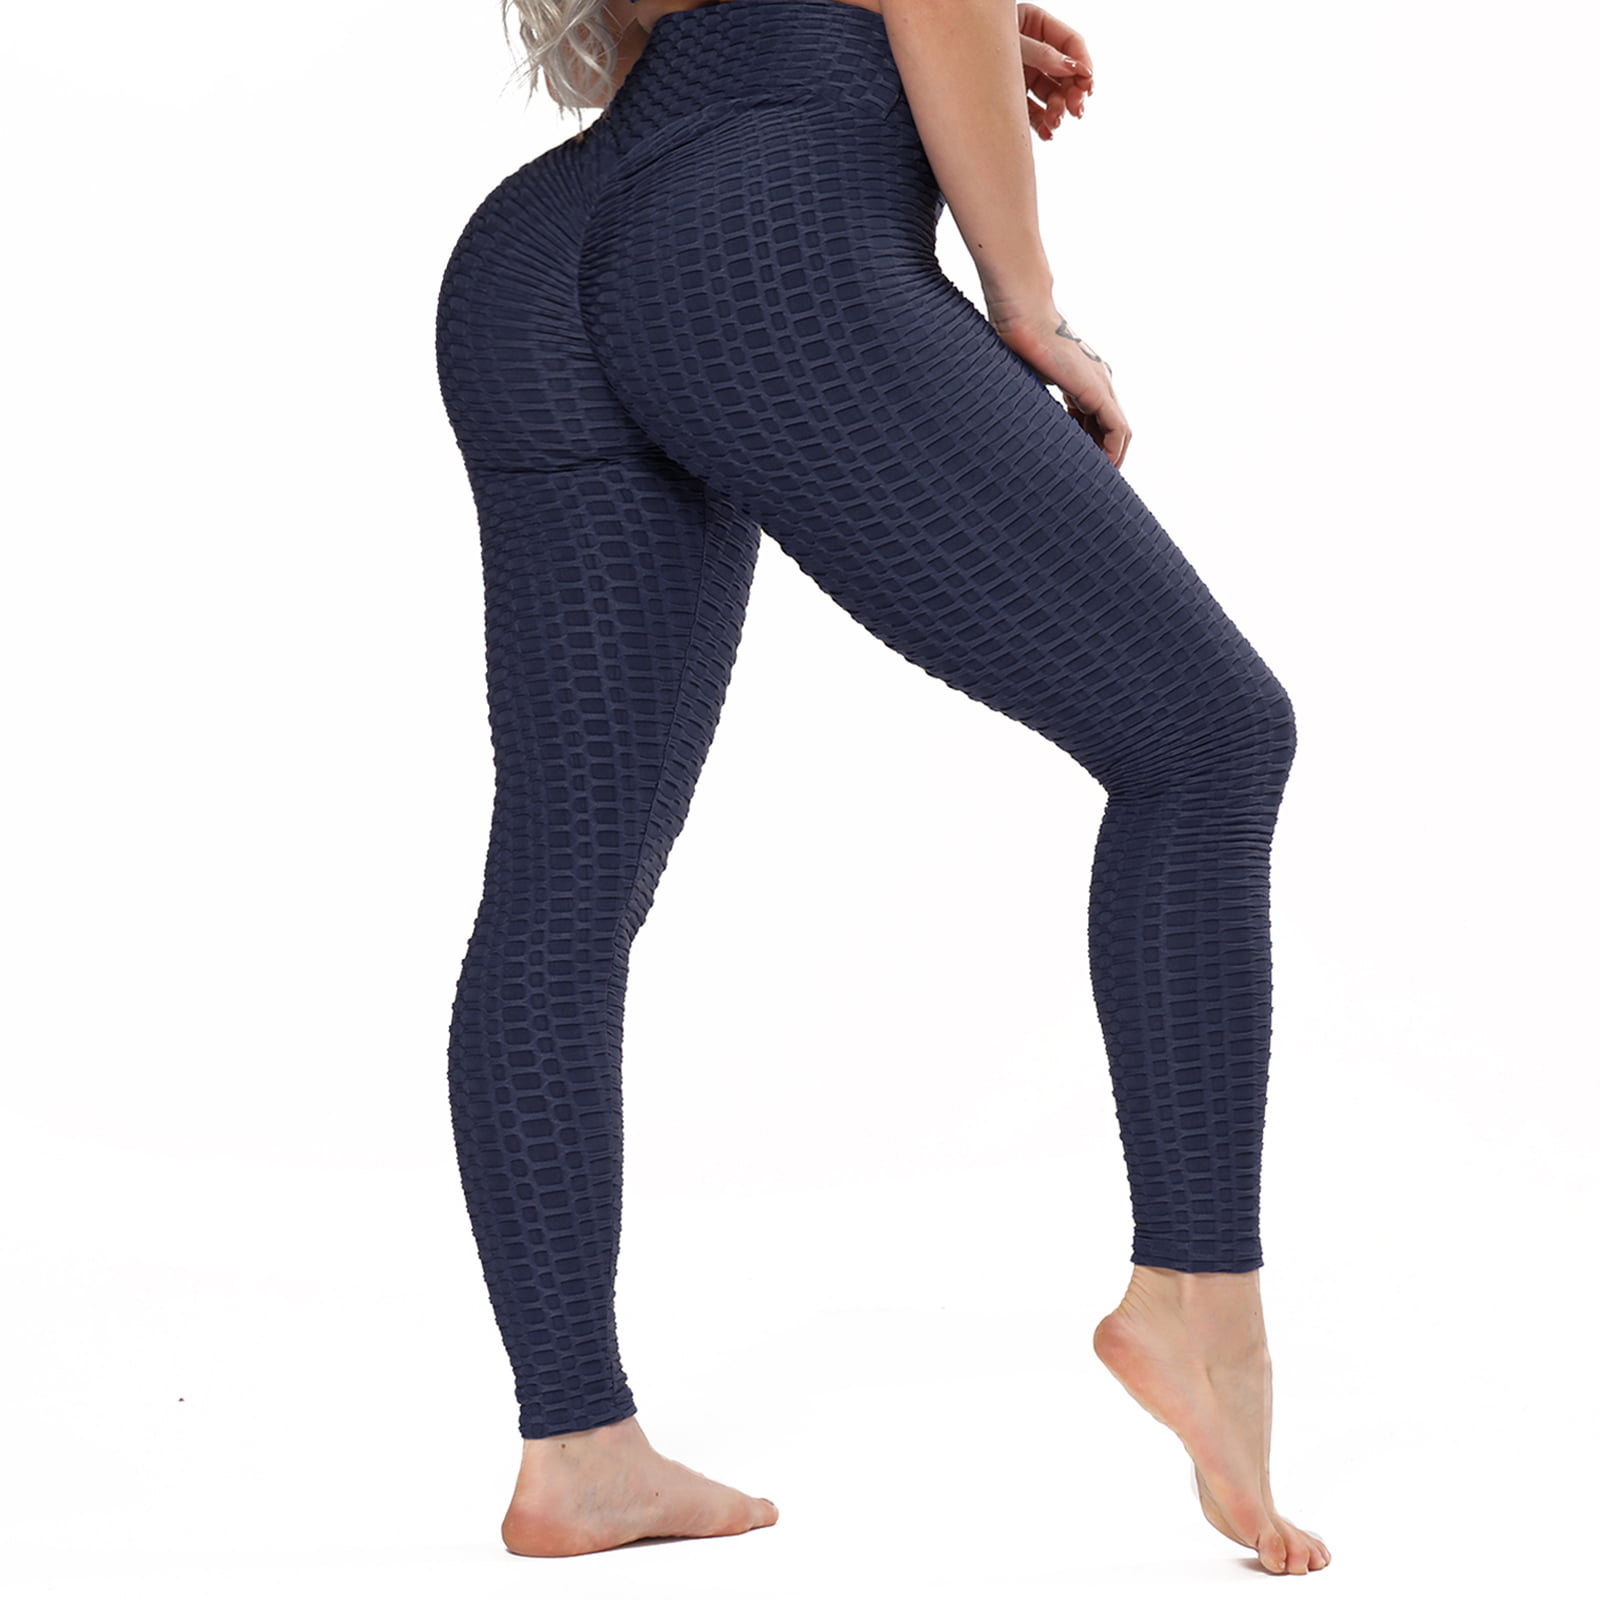 Fittoo Fittoo Women Booty Yoga Pants Women High Waisted Ruched Butt Lift Textured Tummy